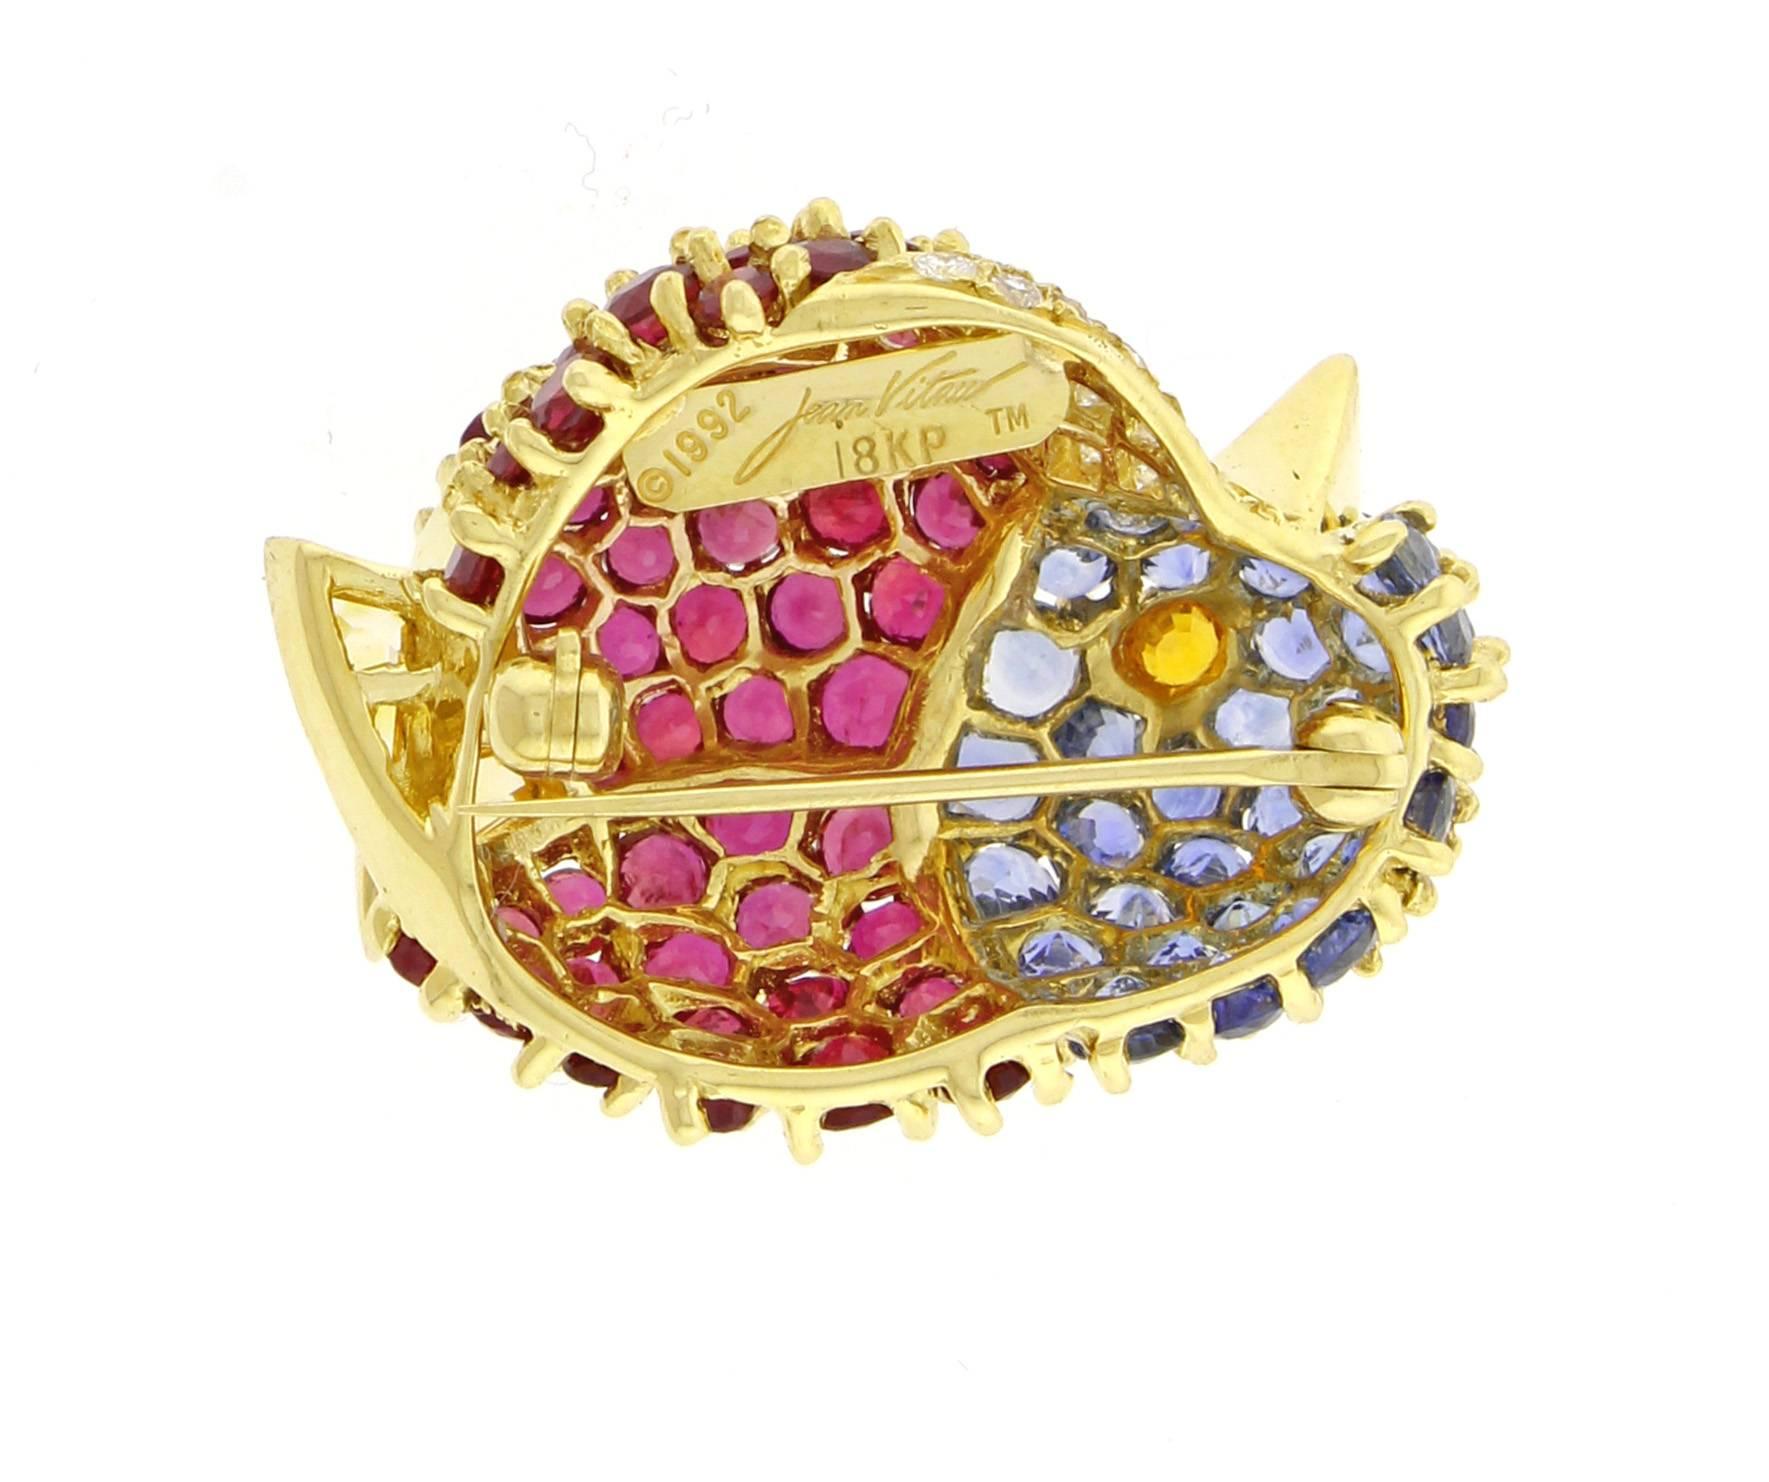 From acclaimed designer Jean Vitau, this wonderful gem-set chickadee brooch.
The brooch features rubies, sapphires and 11 diamonds set in 18 karat gold. 1 1/8 of an inch high 7/8 of an inch wide. 

 Jean Vitau is considered a pioneer in jewelry